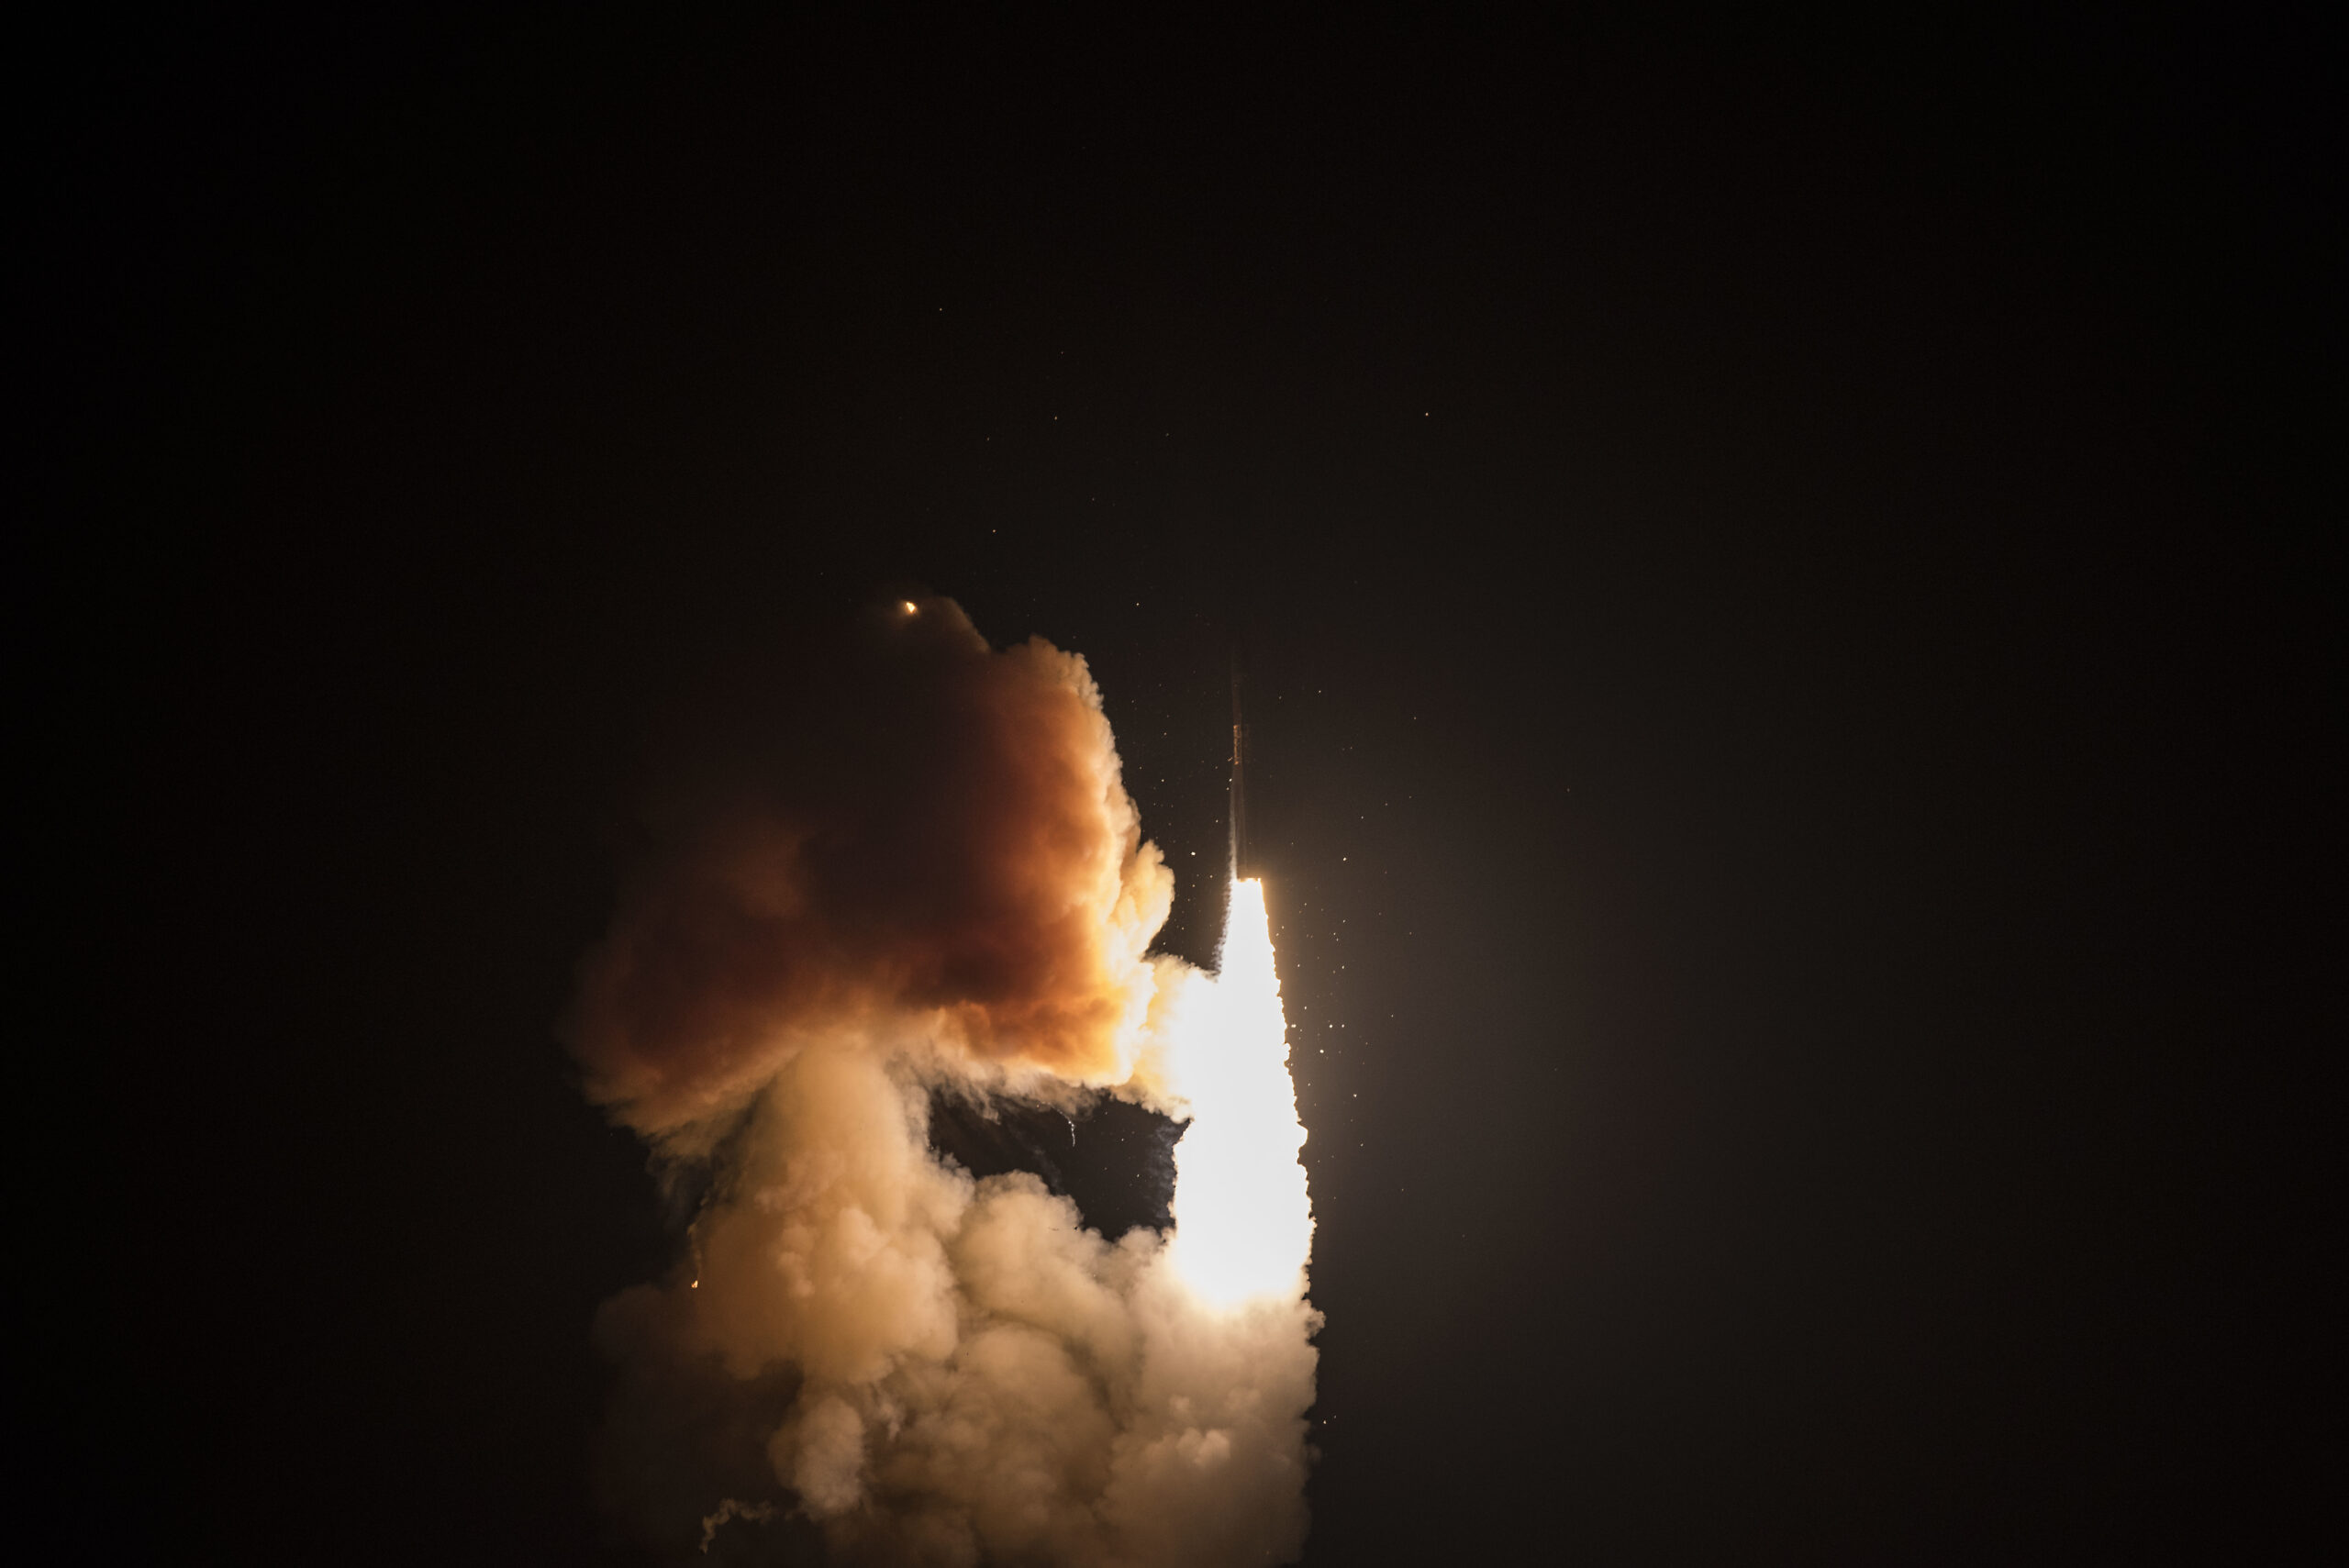 An unarmed Minuteman III intercontinental ballistic missile launches during a developmental test at 12:33 a.m. Pacific Time Wednesday, Feb. 5, 2020, at Vandenberg Air Force Base, Calif. (U.S. Air Force photo by Airman 1st Class Hanah Abercrombie)